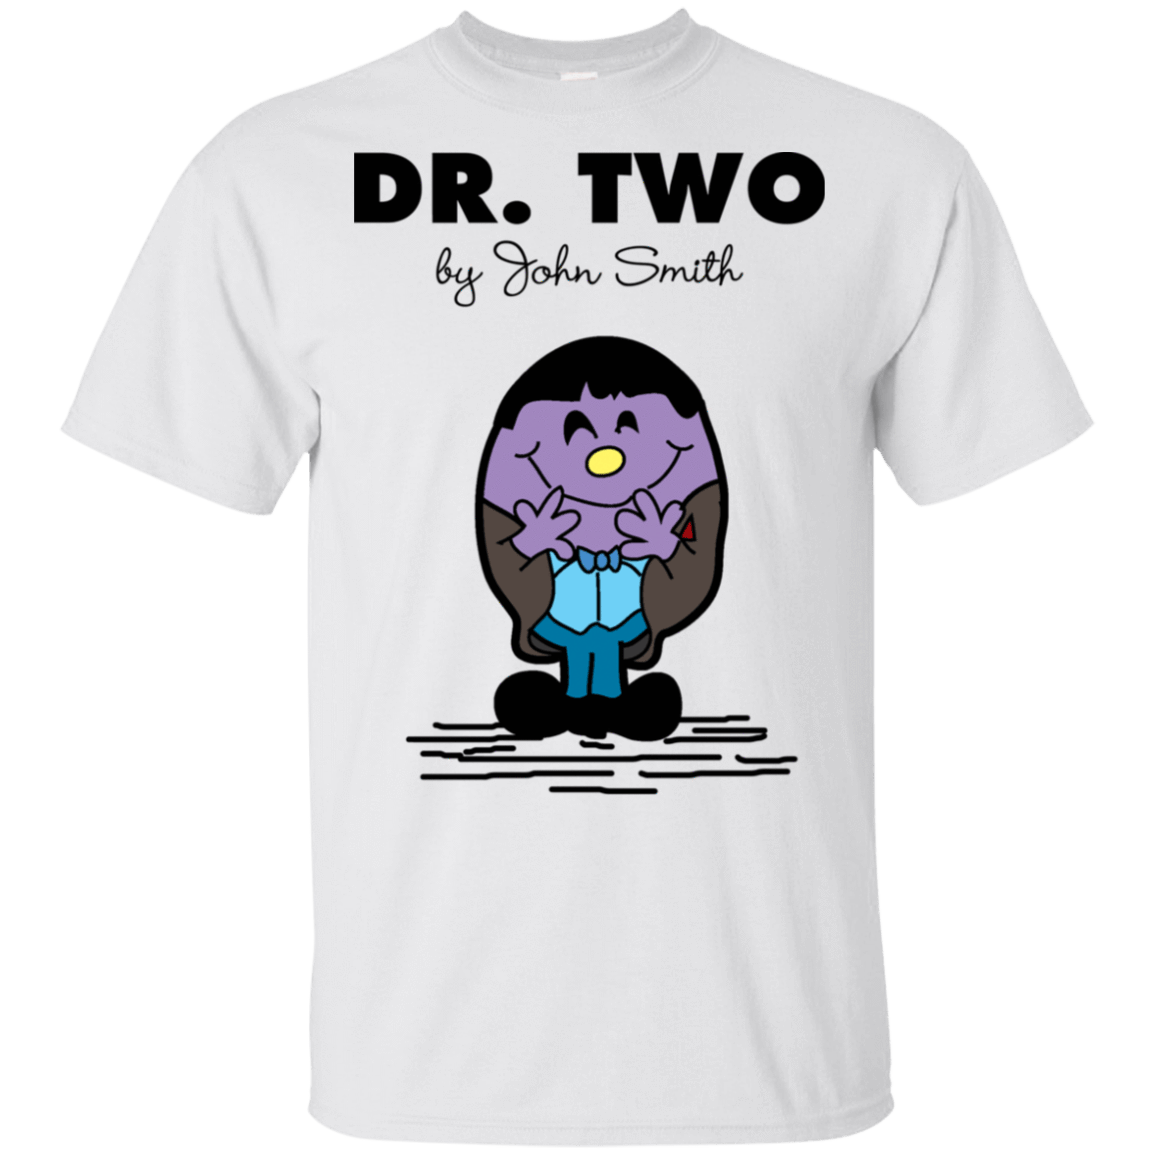 T-Shirts White / S Dr Two T-Shirt